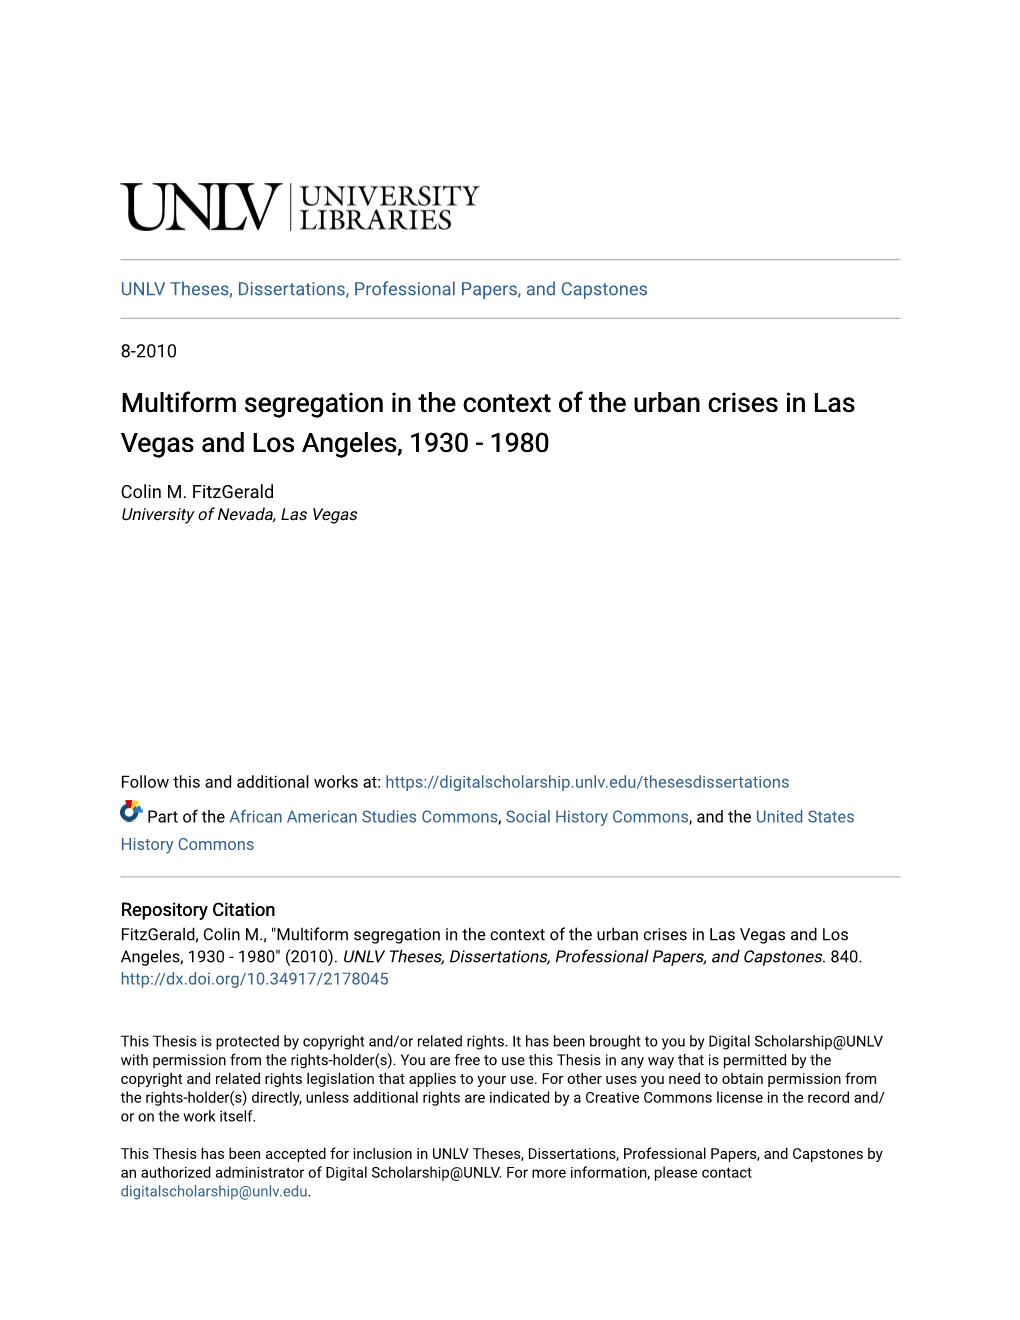 Multiform Segregation in the Context of the Urban Crises in Las Vegas and Los Angeles, 1930 - 1980